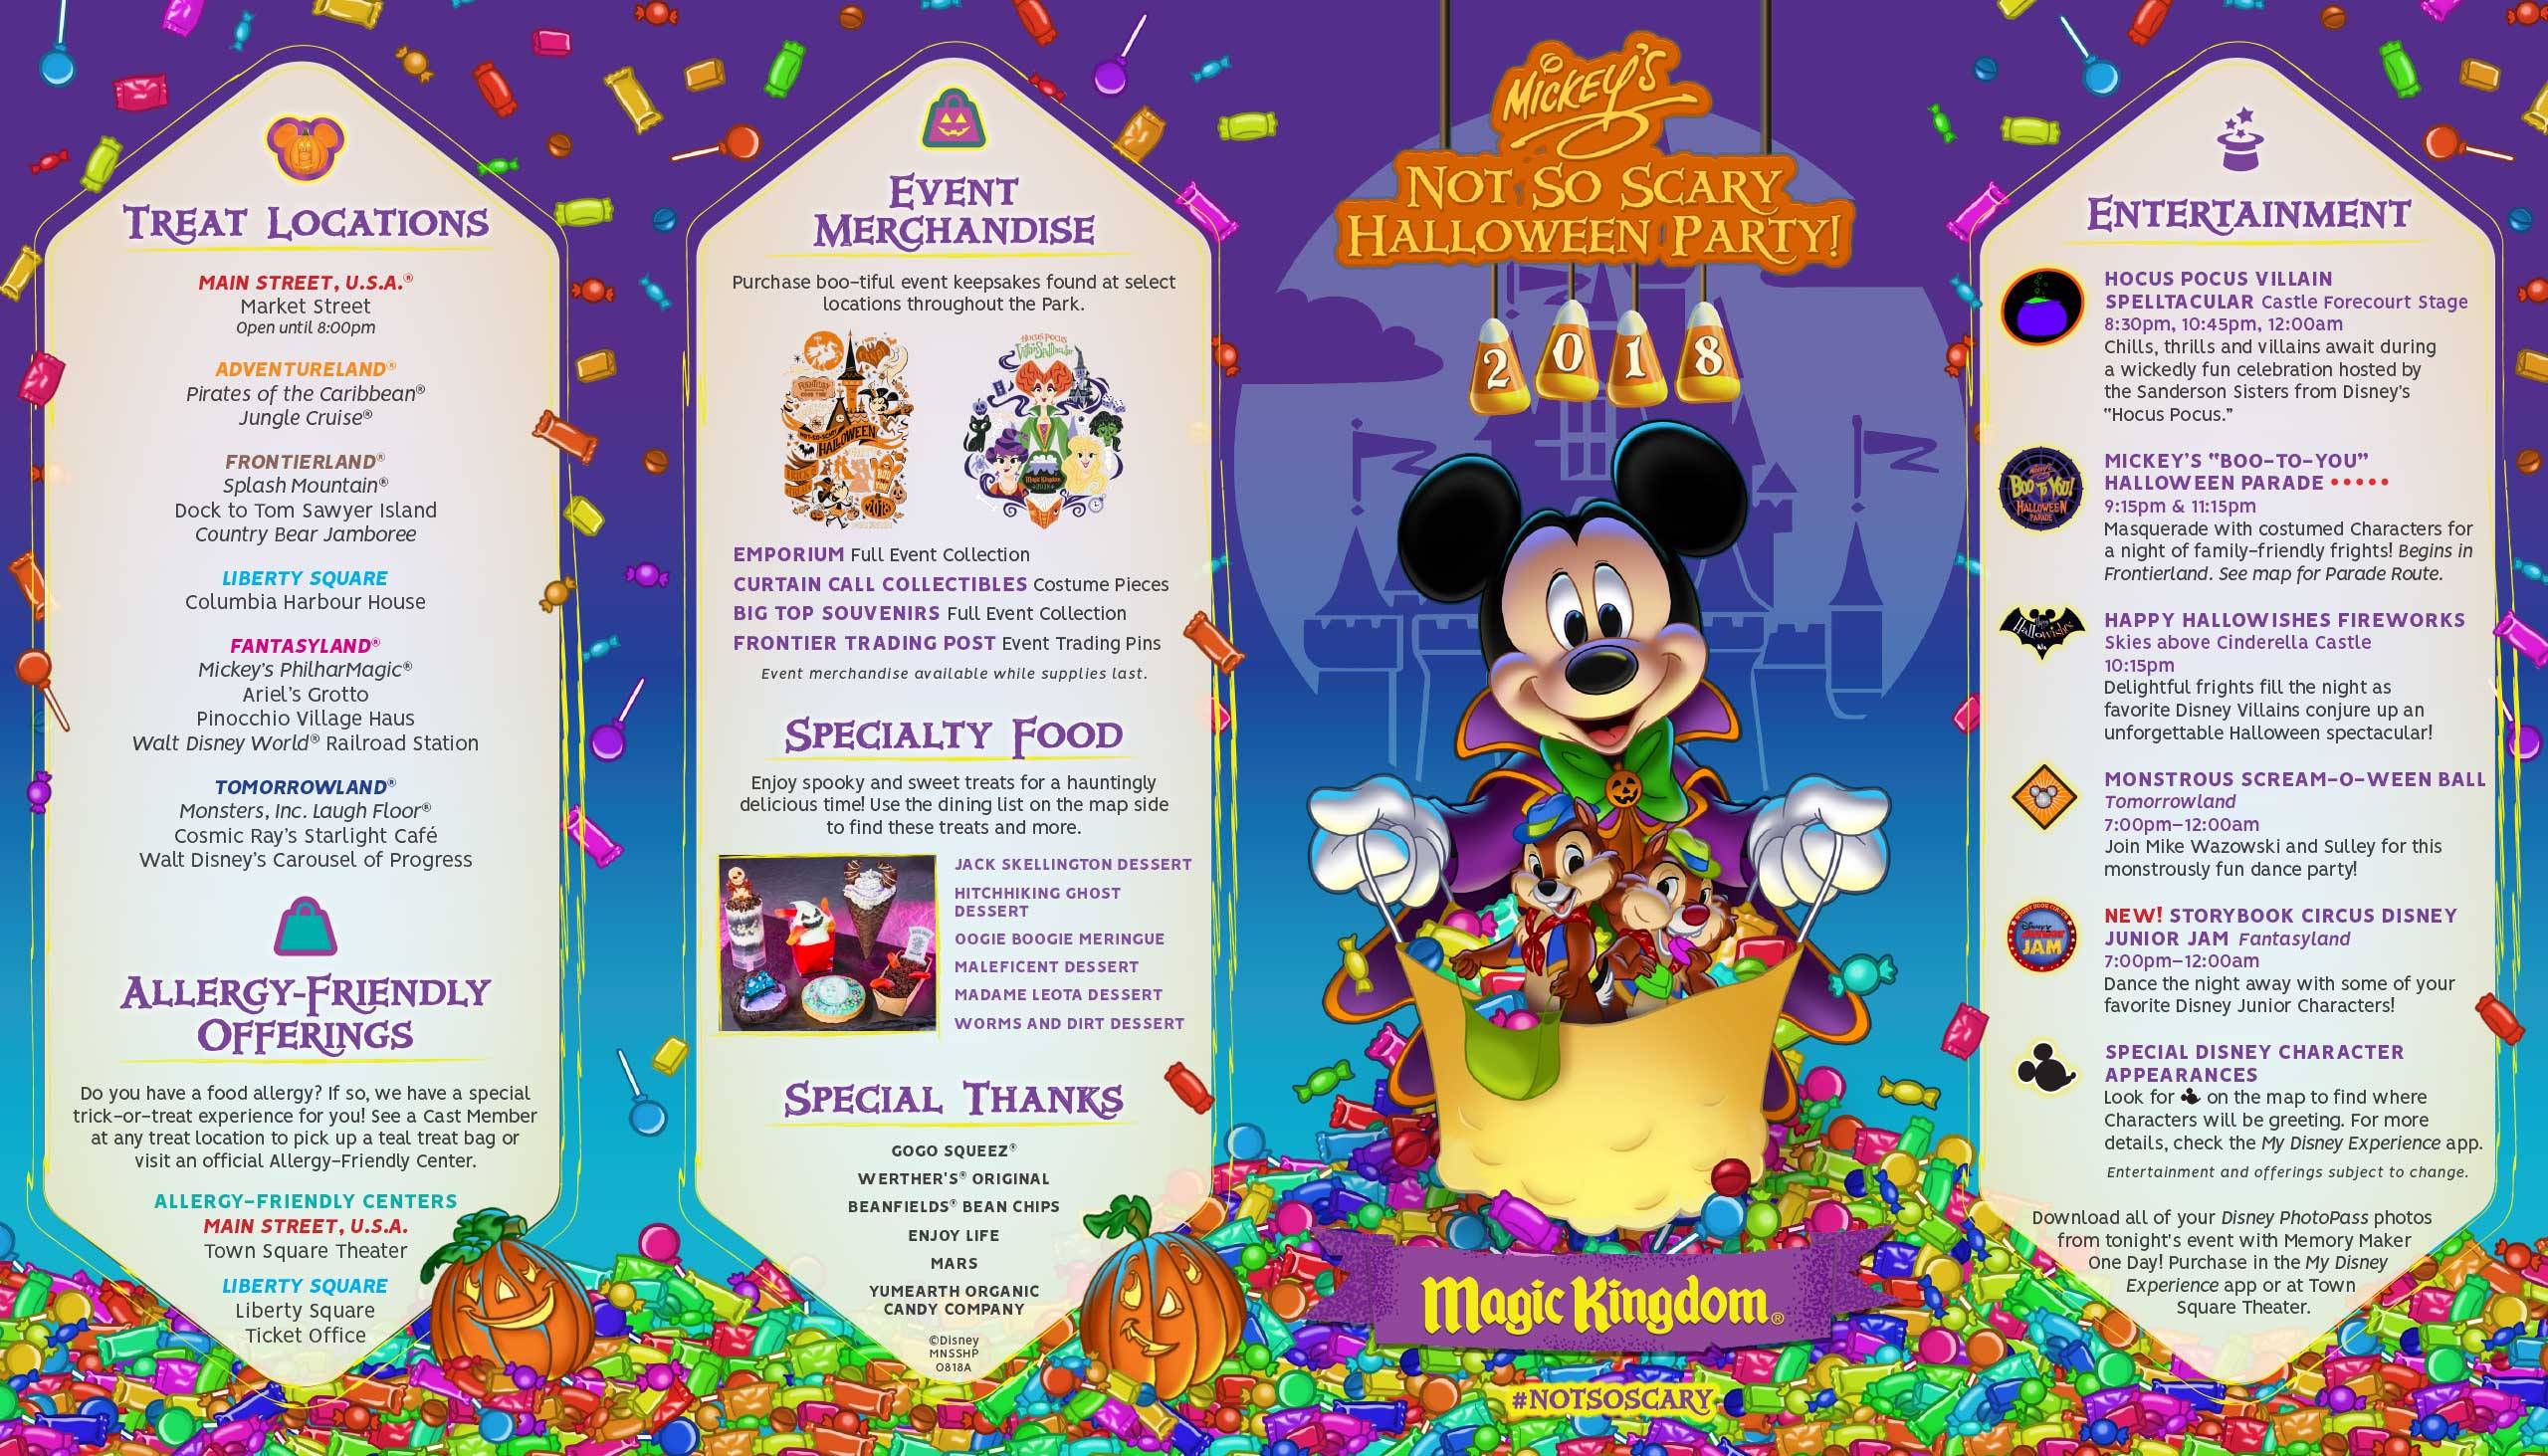 Mickey's Not-So-Scary Halloween Party 2018 guide map